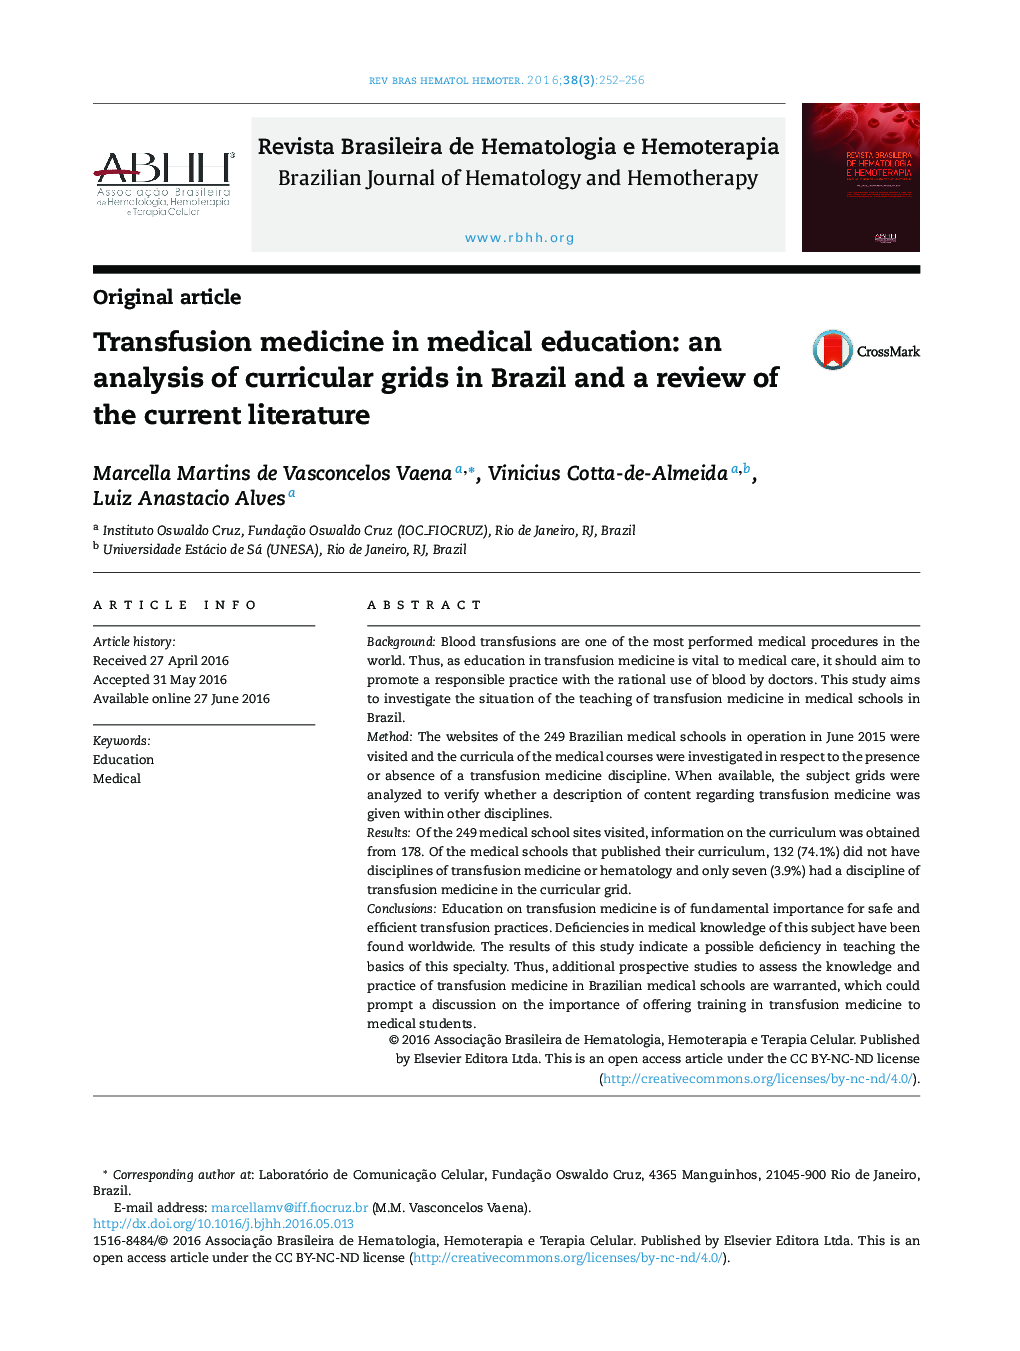 Transfusion medicine in medical education: an analysis of curricular grids in Brazil and a review of the current literature